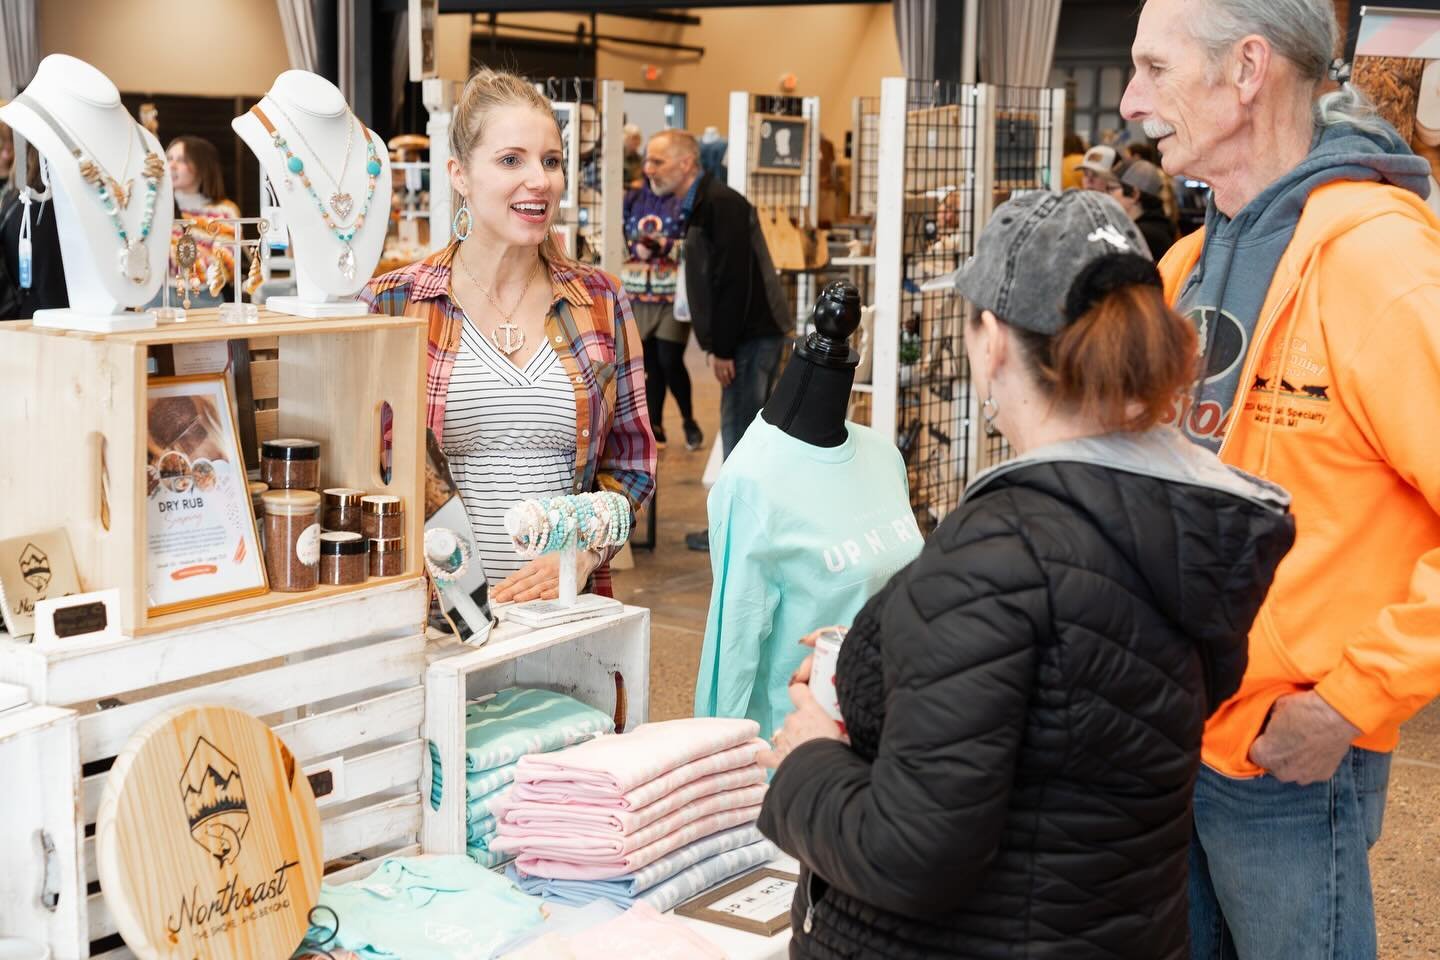 BIG NEWS 📰  We&rsquo;re excited to share that The MPLS Craft Market is headed to the @MallOfAmerica ⭐️🛍️

📢Makers registration is now LIVE! 

The Minneapolis Craft Market at Mall of America is a month-long popup featuring a curated selection of lo